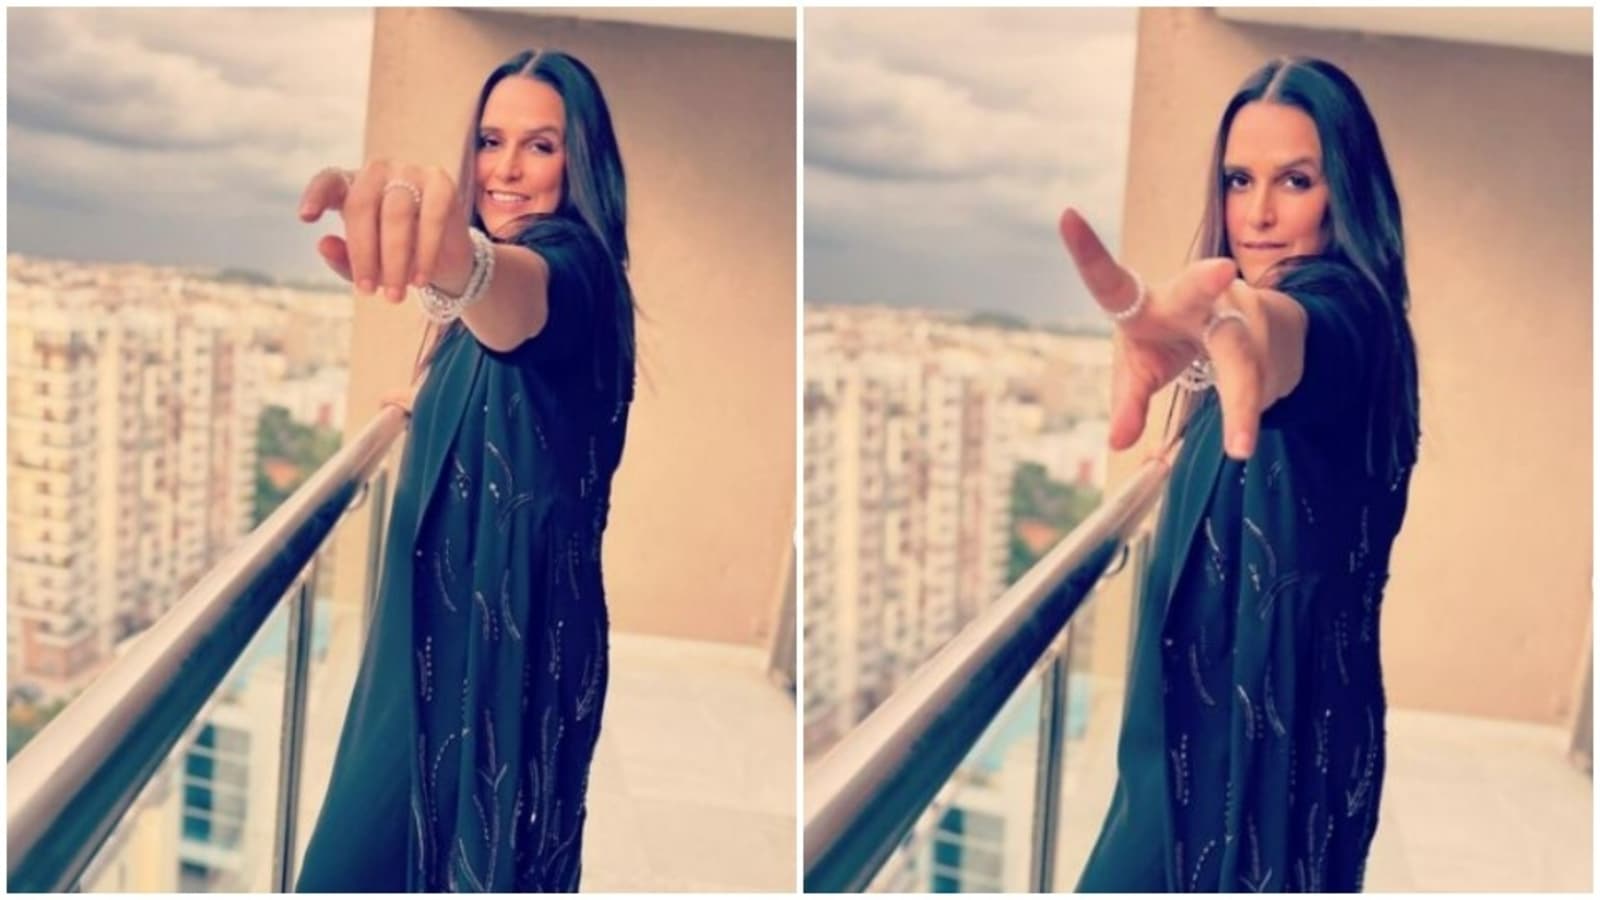 neha-dhupia-in-a-black-ensemble-is-too-dressed-to-standstill